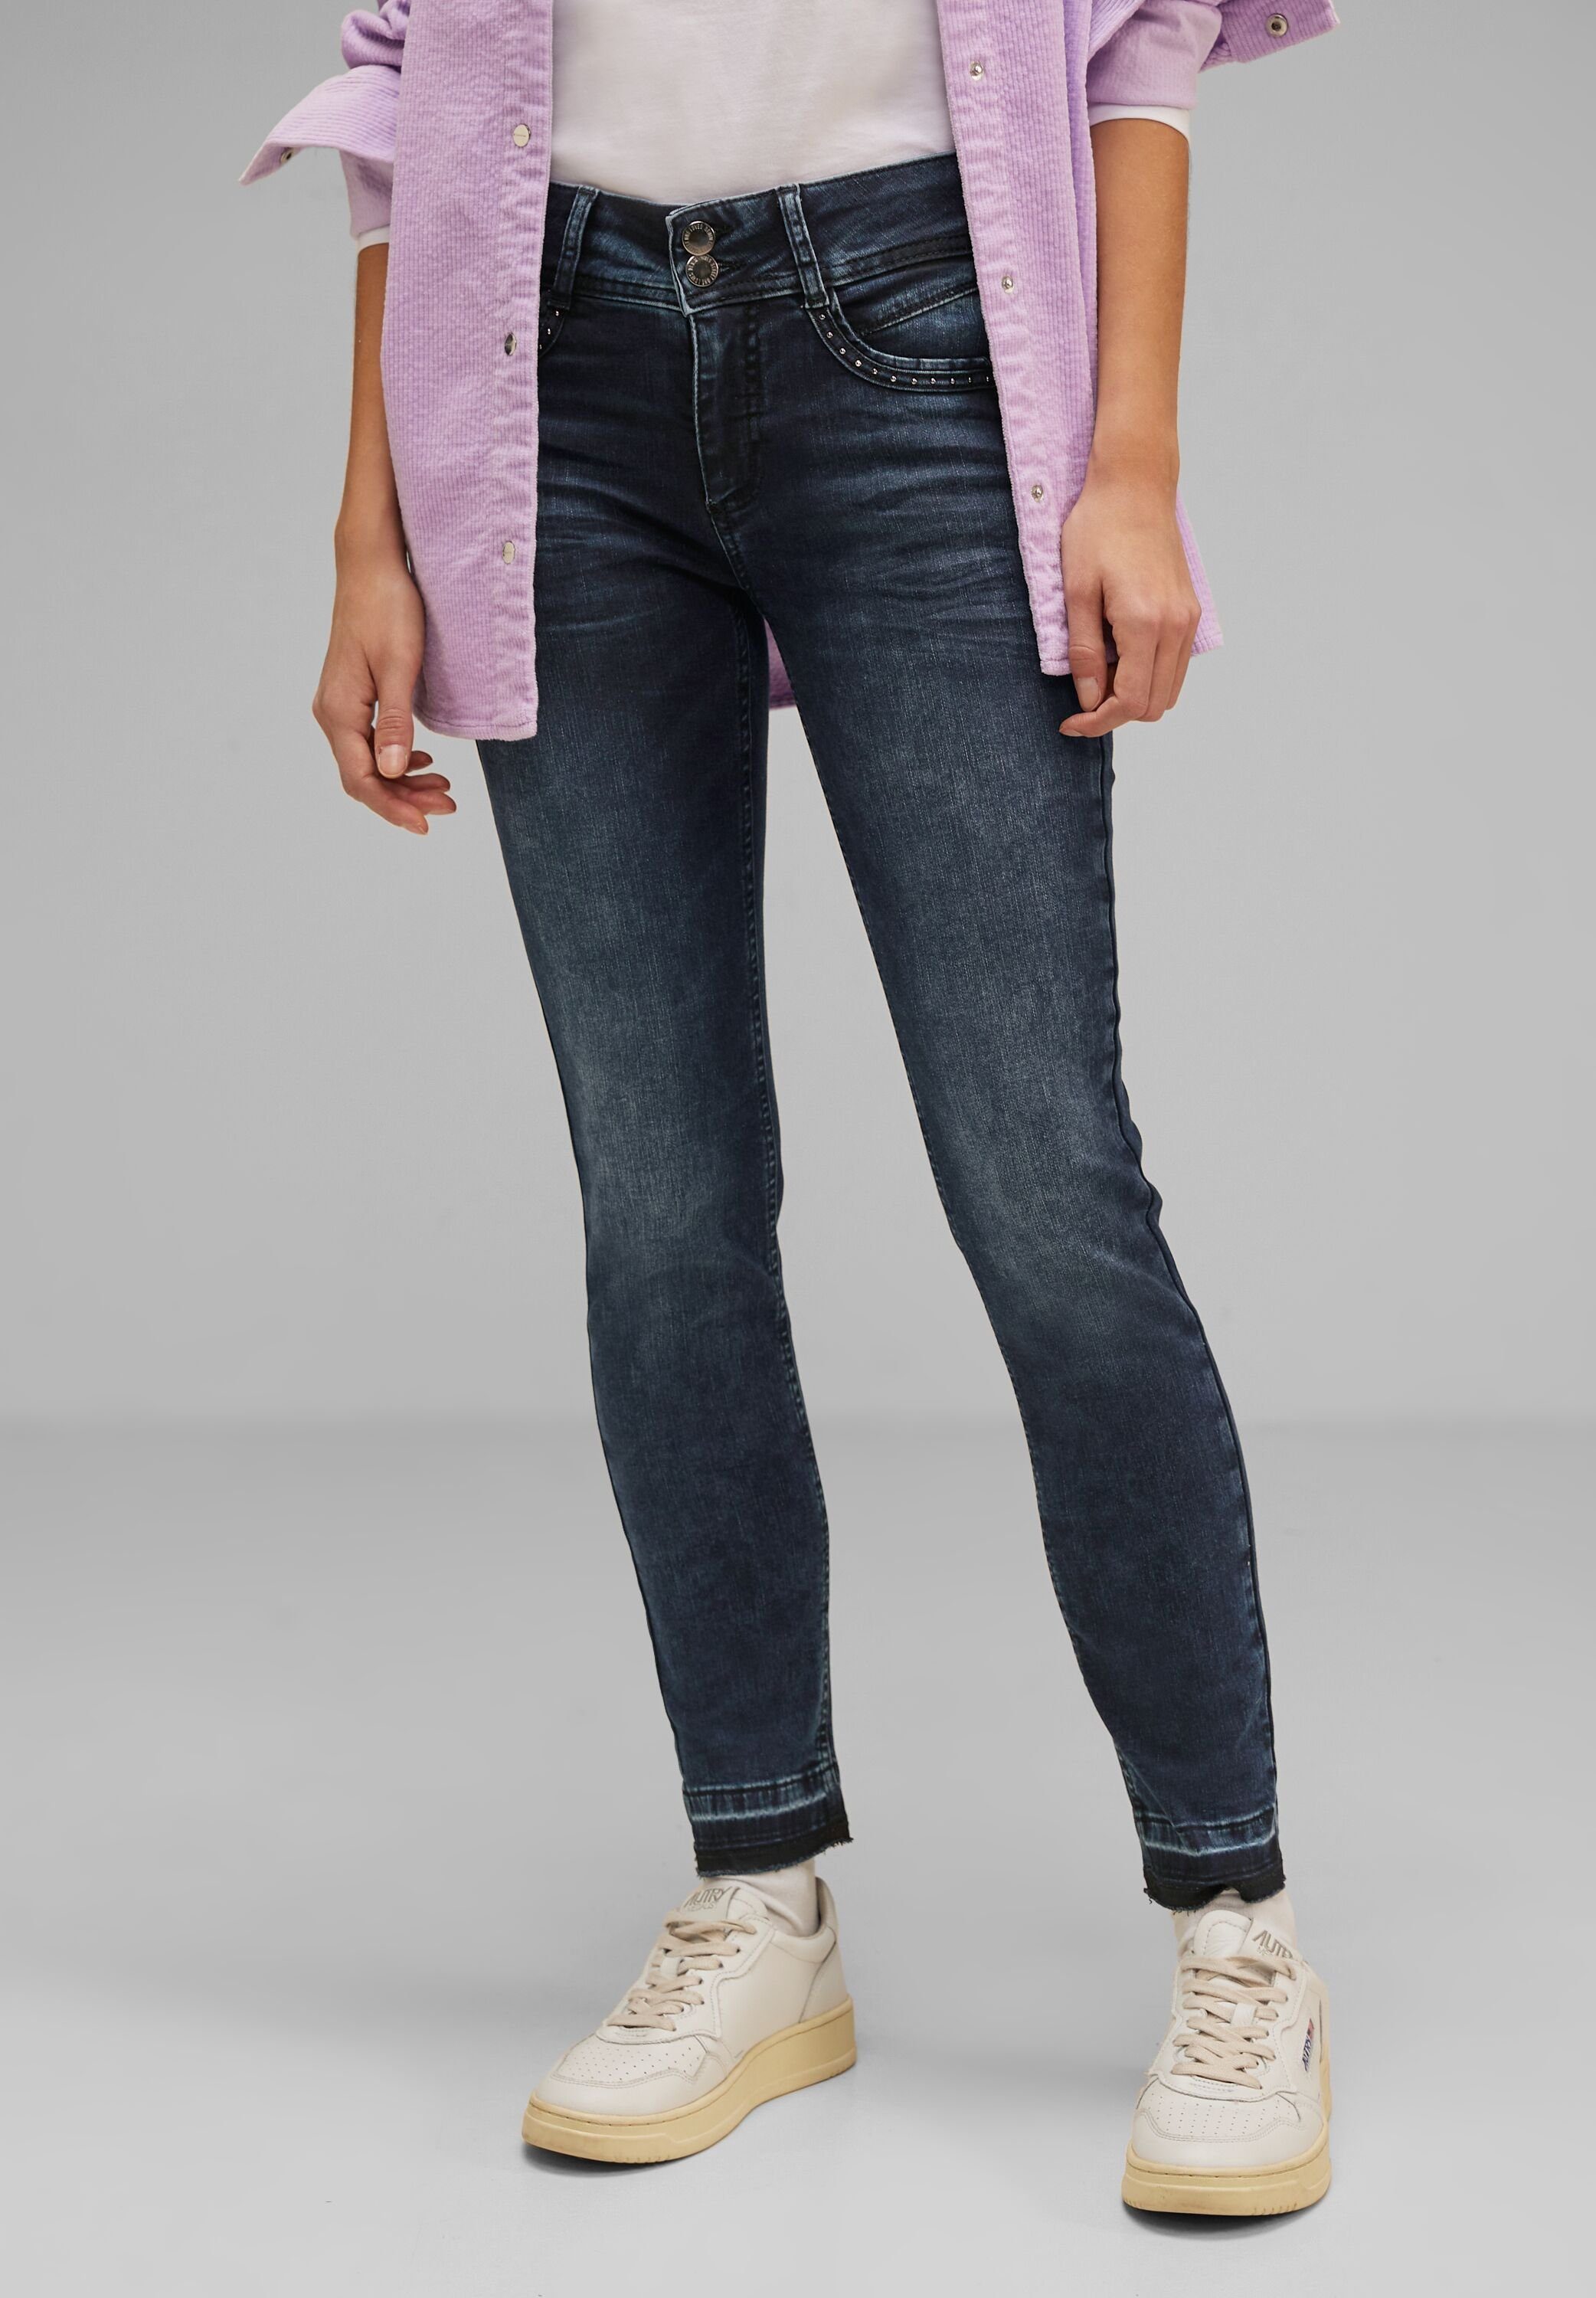 STREET Middle Jeans Gerade ONE Waist